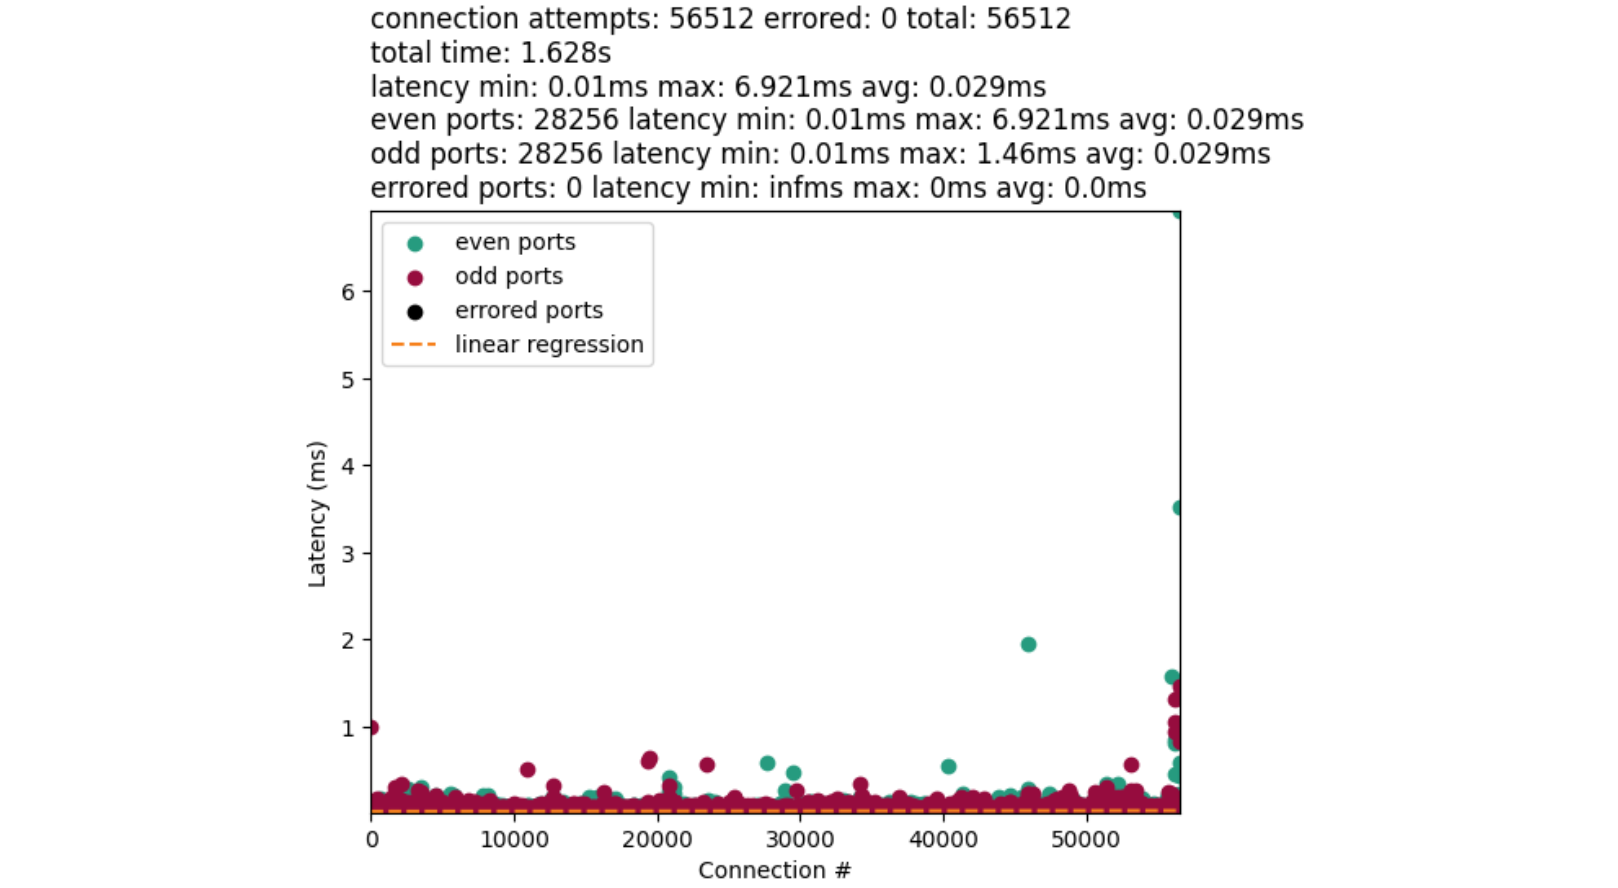 Figure 8: A detailed chart representing a flat-linear distribution of port-finding speeds. Out of 56,512 connections the average time spent finding an even port is 0.029 milliseconds while we see 0.029 milliseconds on average for odd ports. There are no errors.